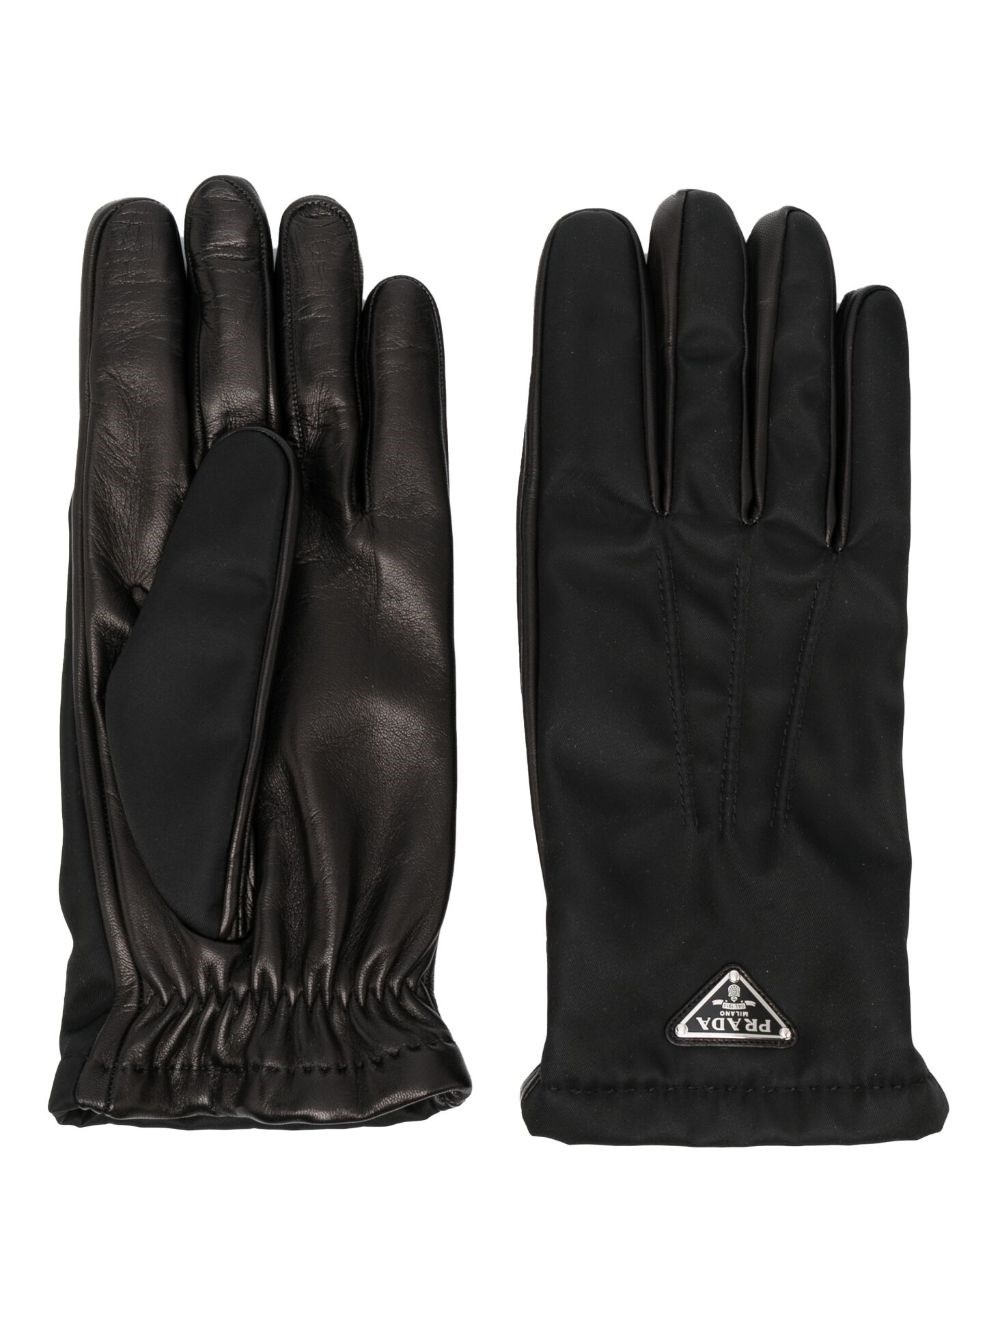 prada GLOVES available on montiboutique.com - 56374